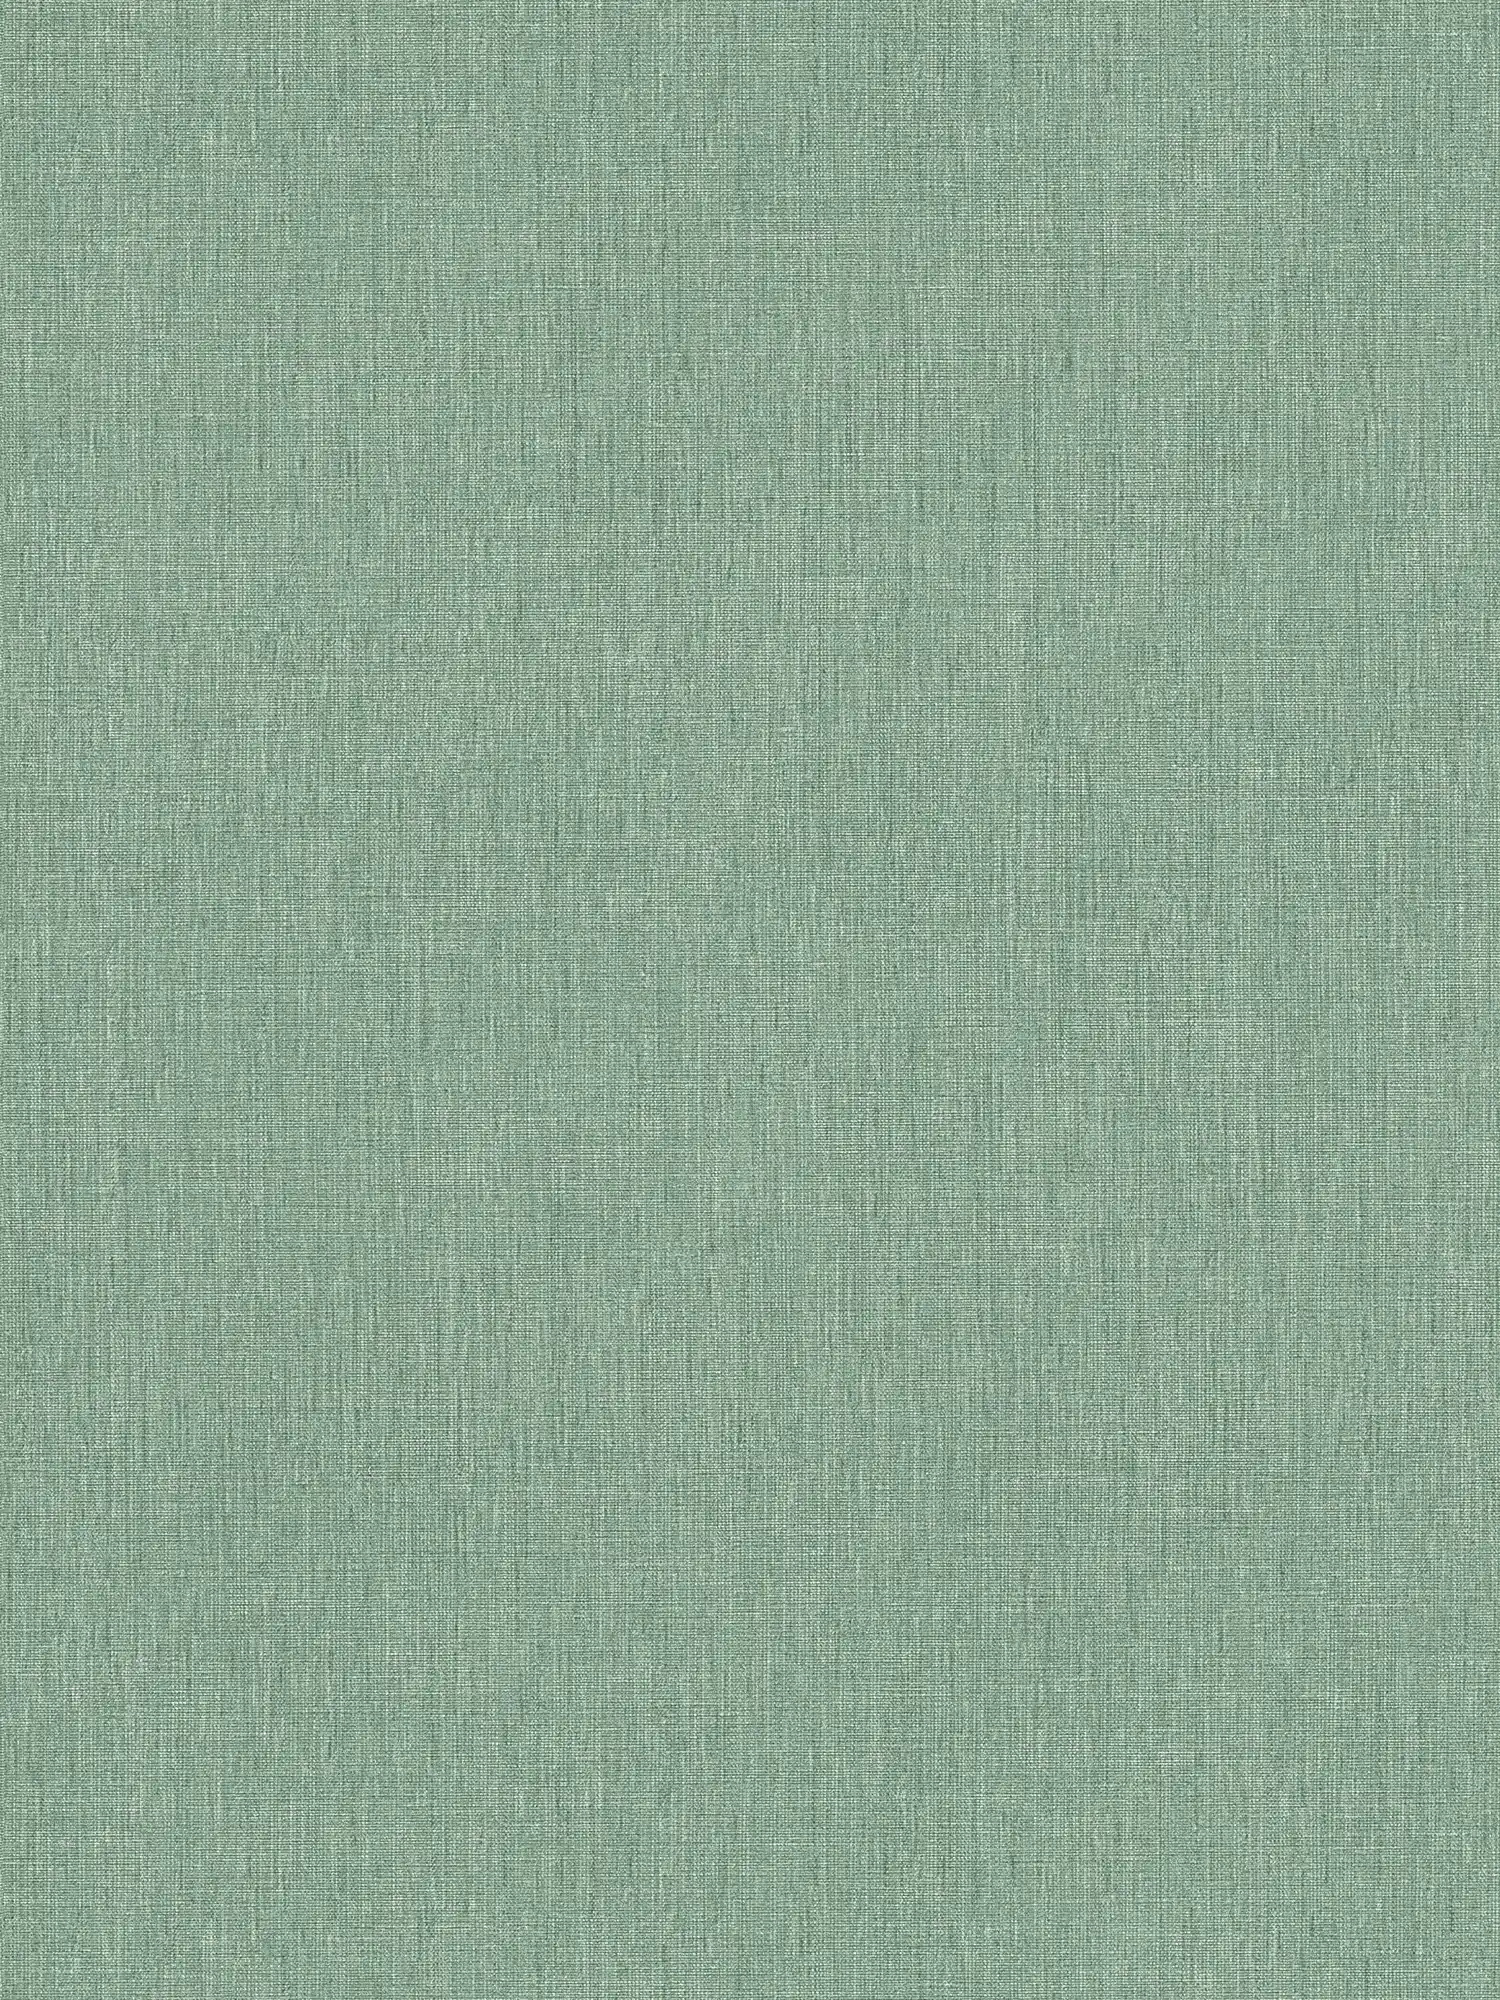 Plain wallpaper in textile look with texture - green
